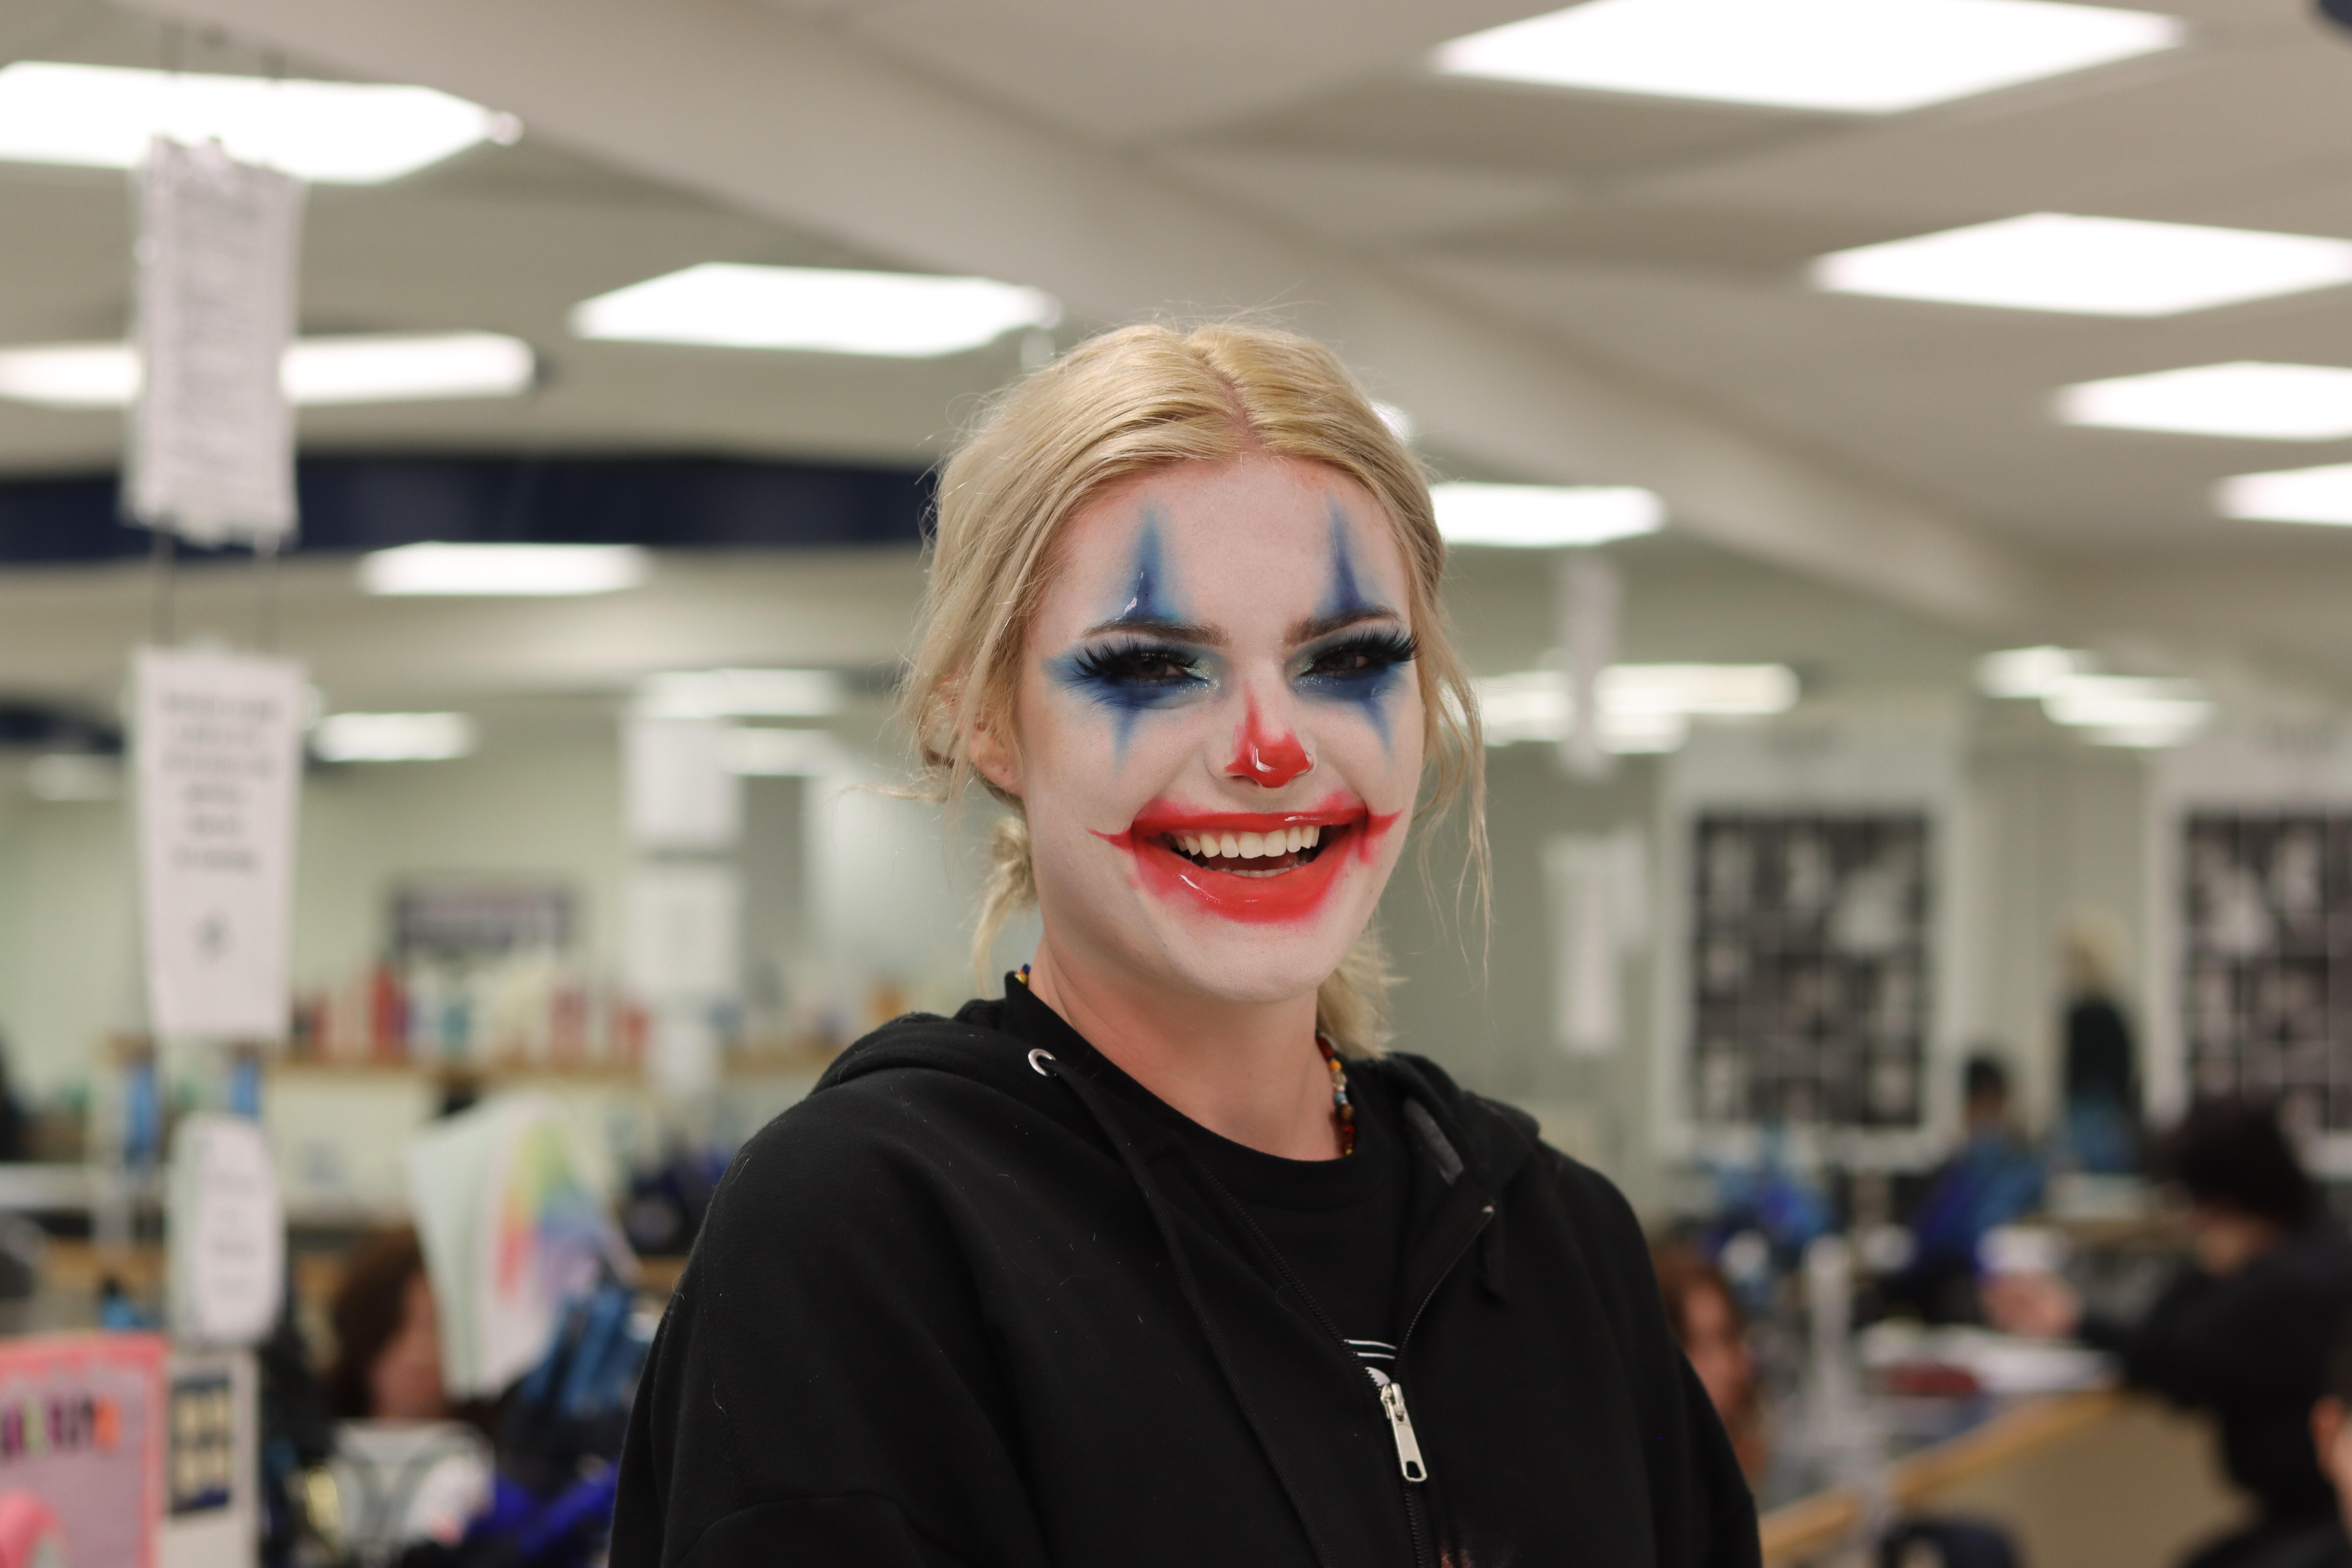 ICC cosmetology student with clown makeup on and smiling